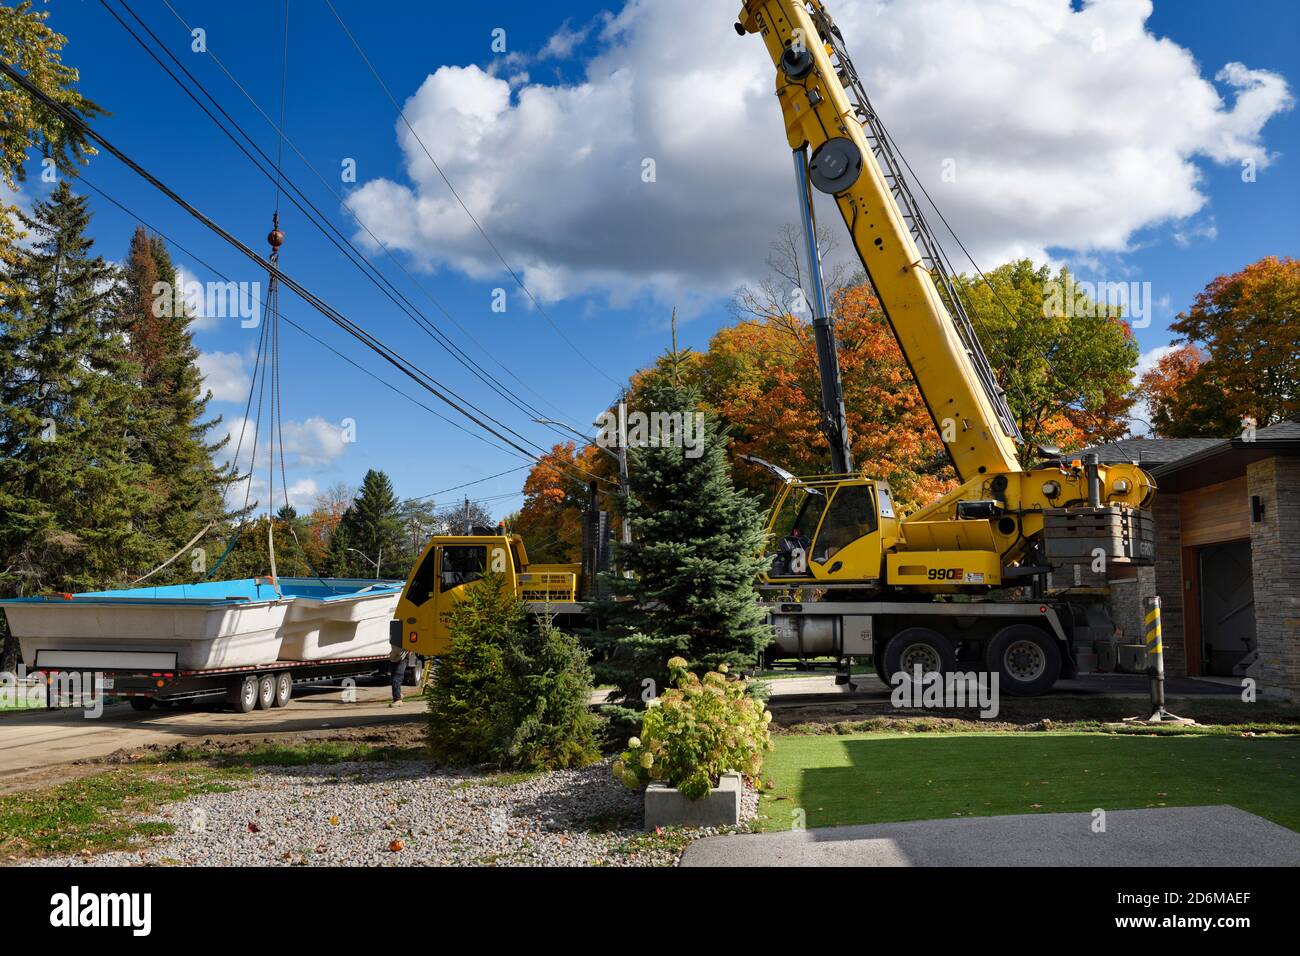 Crane ready to lift fiberglass swimming pool shell from flatbed truck over hydro wires and house to back yard in the Fall Stock Photo